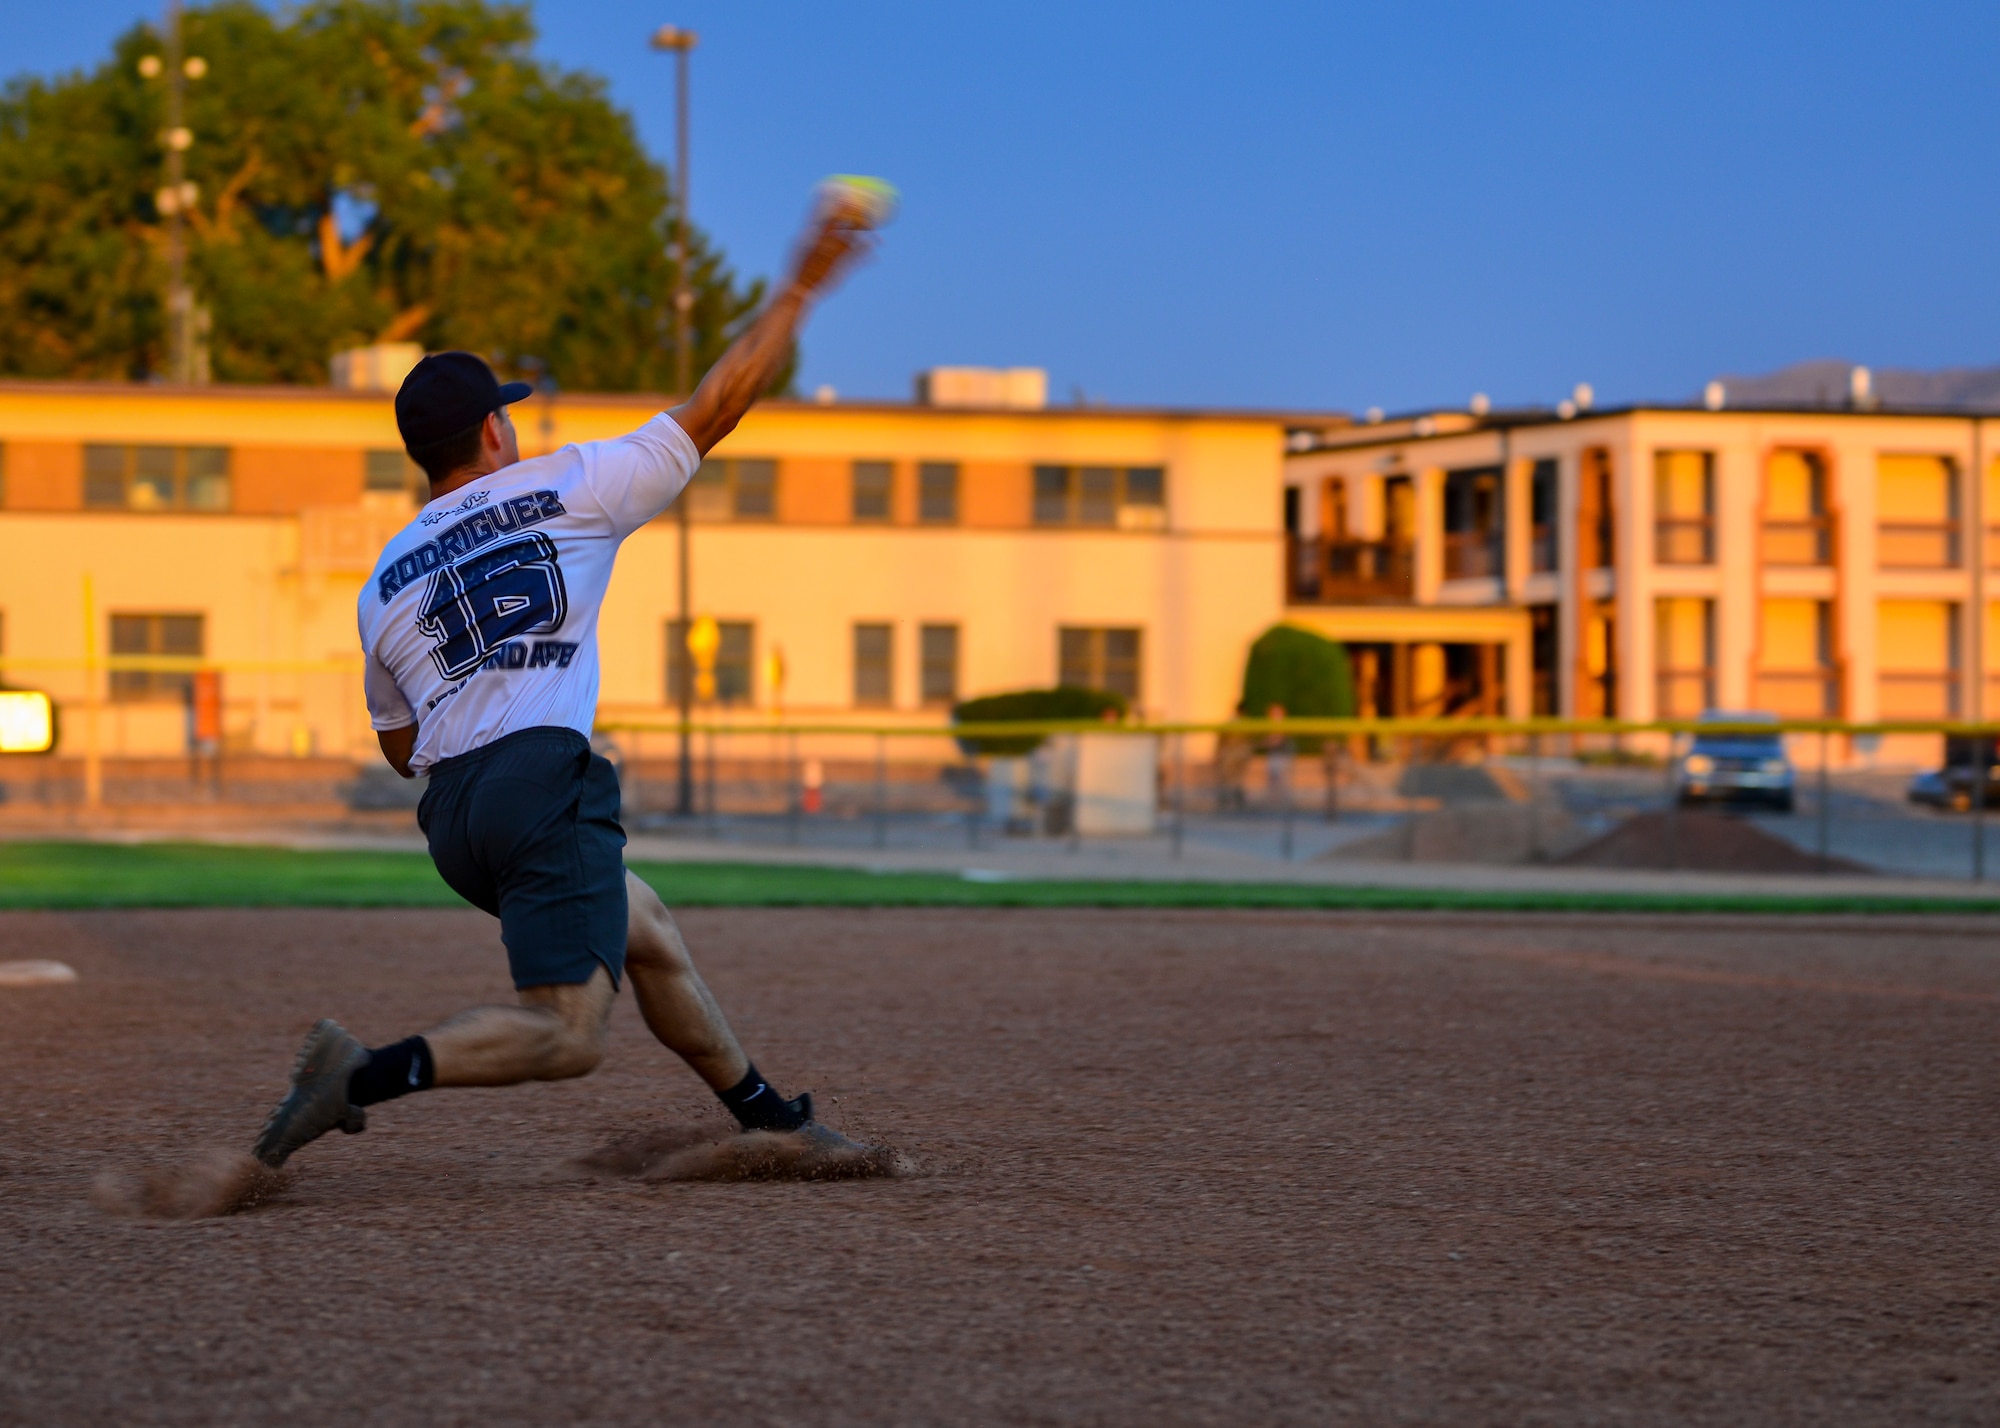 Gabe Rodriguez, third baseman for Team SFS, throws the softball to first base during the 2019 Kirtland Softball Intramural Championship Game at Kirtland Air Force Base, N.M., August 22, 2019. The championship game was a seven-inning game with Team AFRL beating Team SFS with a final score of 26-22. (U.S. Air Force photo by Airman 1st Class Austin J. Prisbrey)